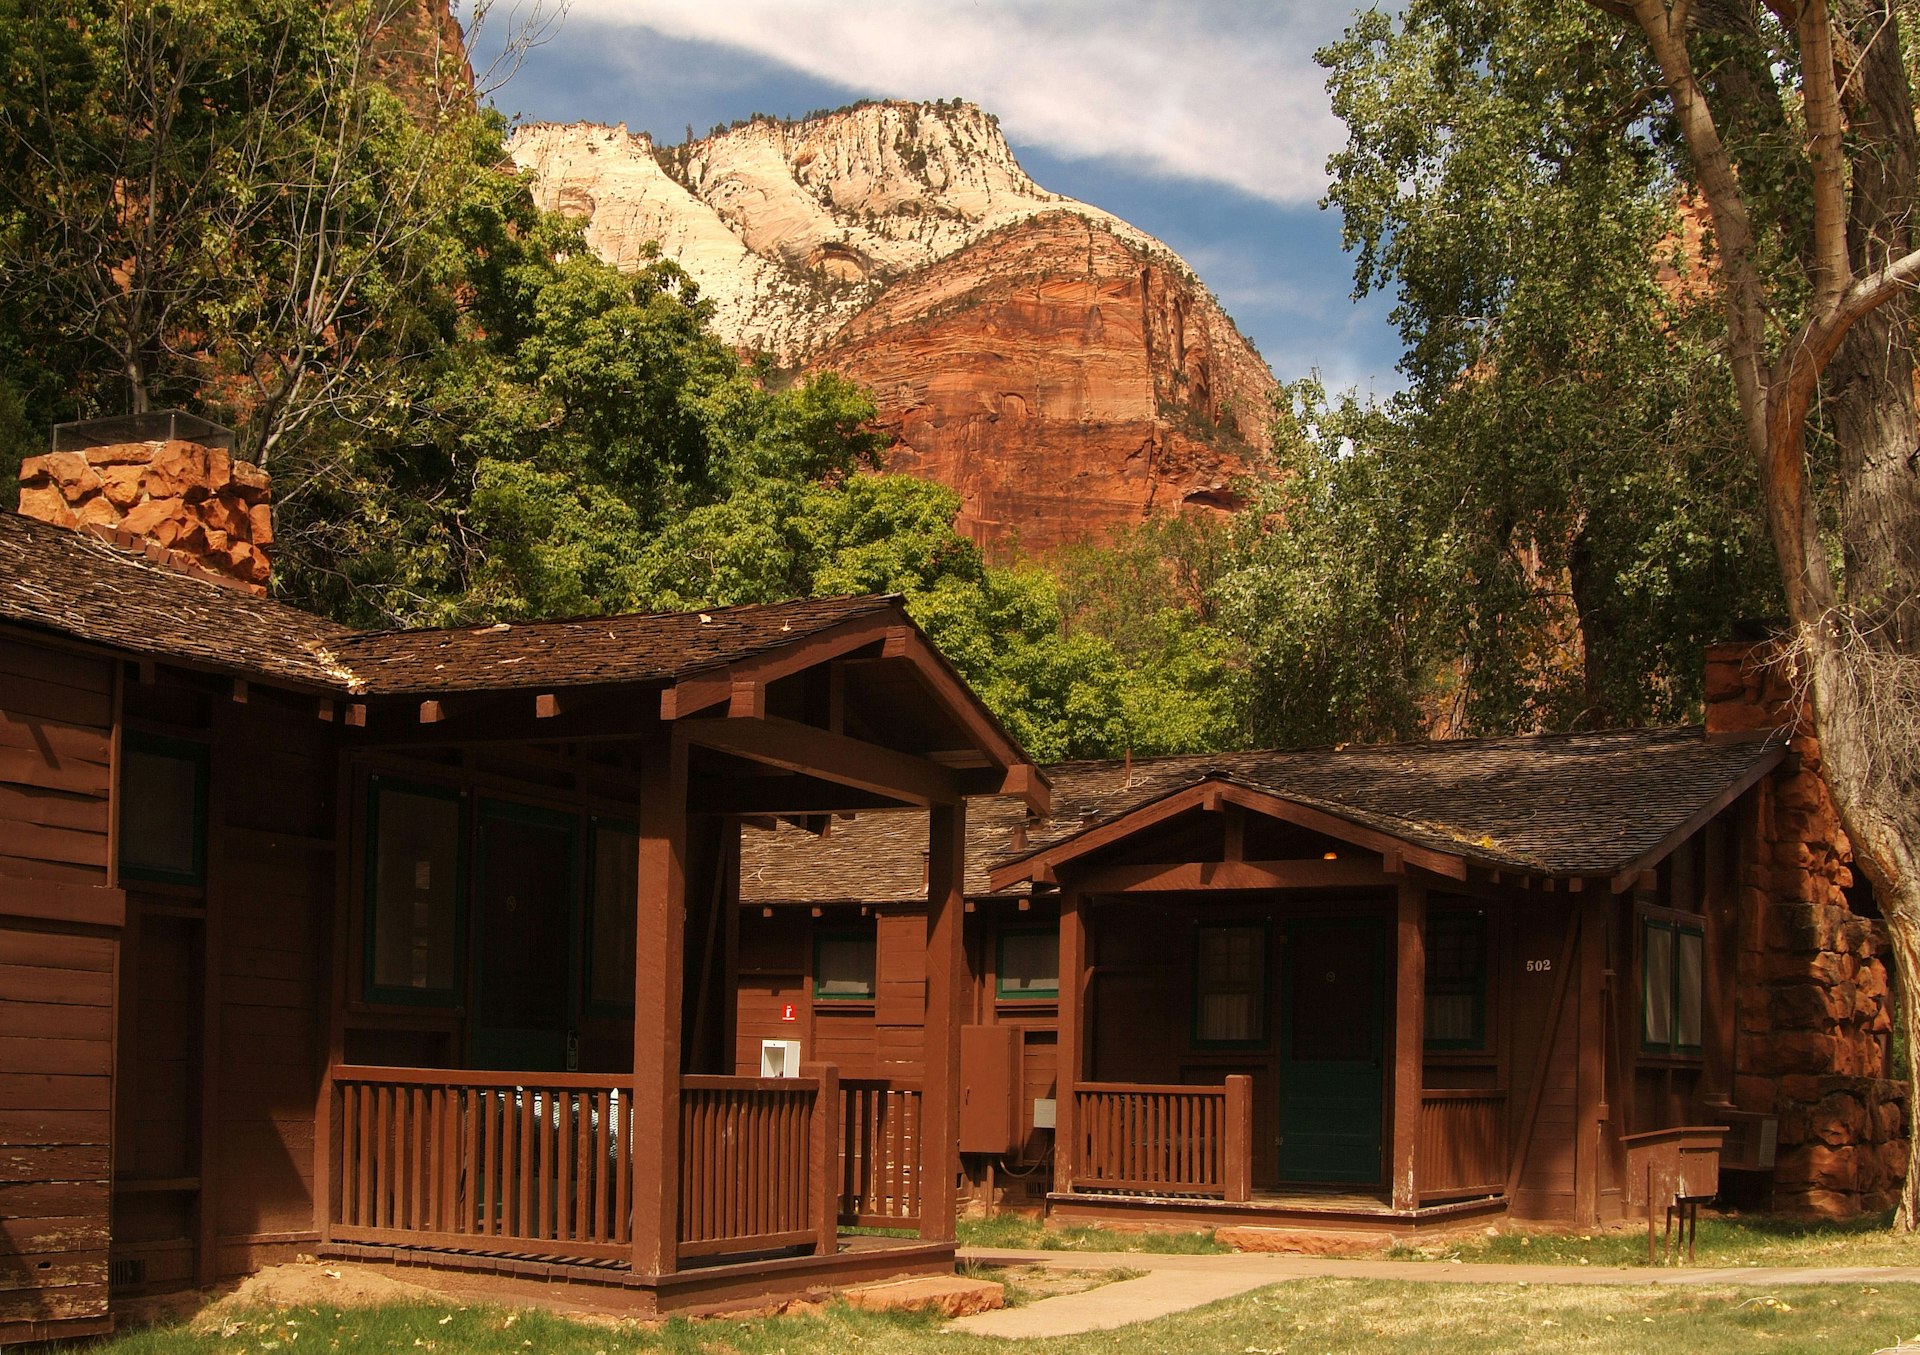 Zion National Park's Western Cabins